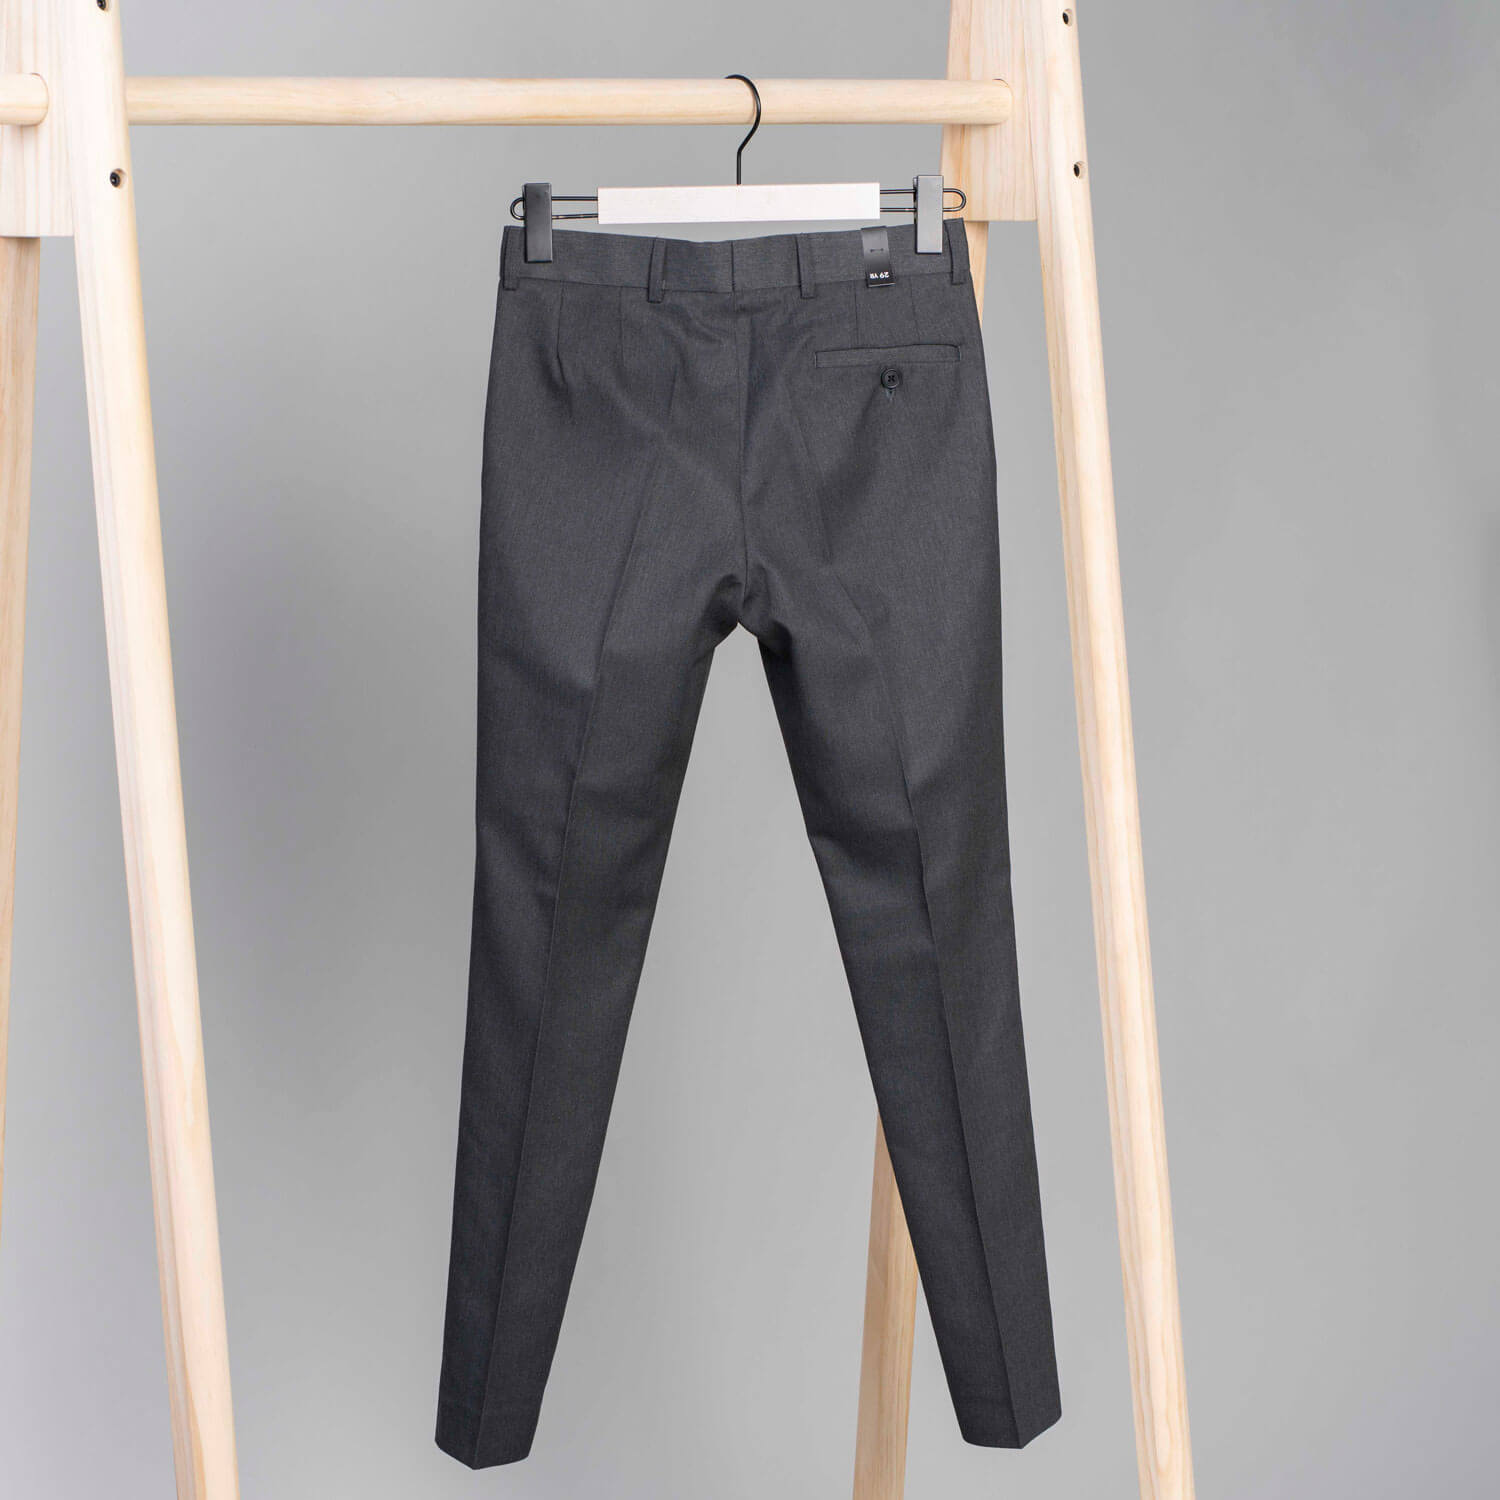 Blue Dot Boys Slimfit Trousers - Grey 2 Shaws Department Stores